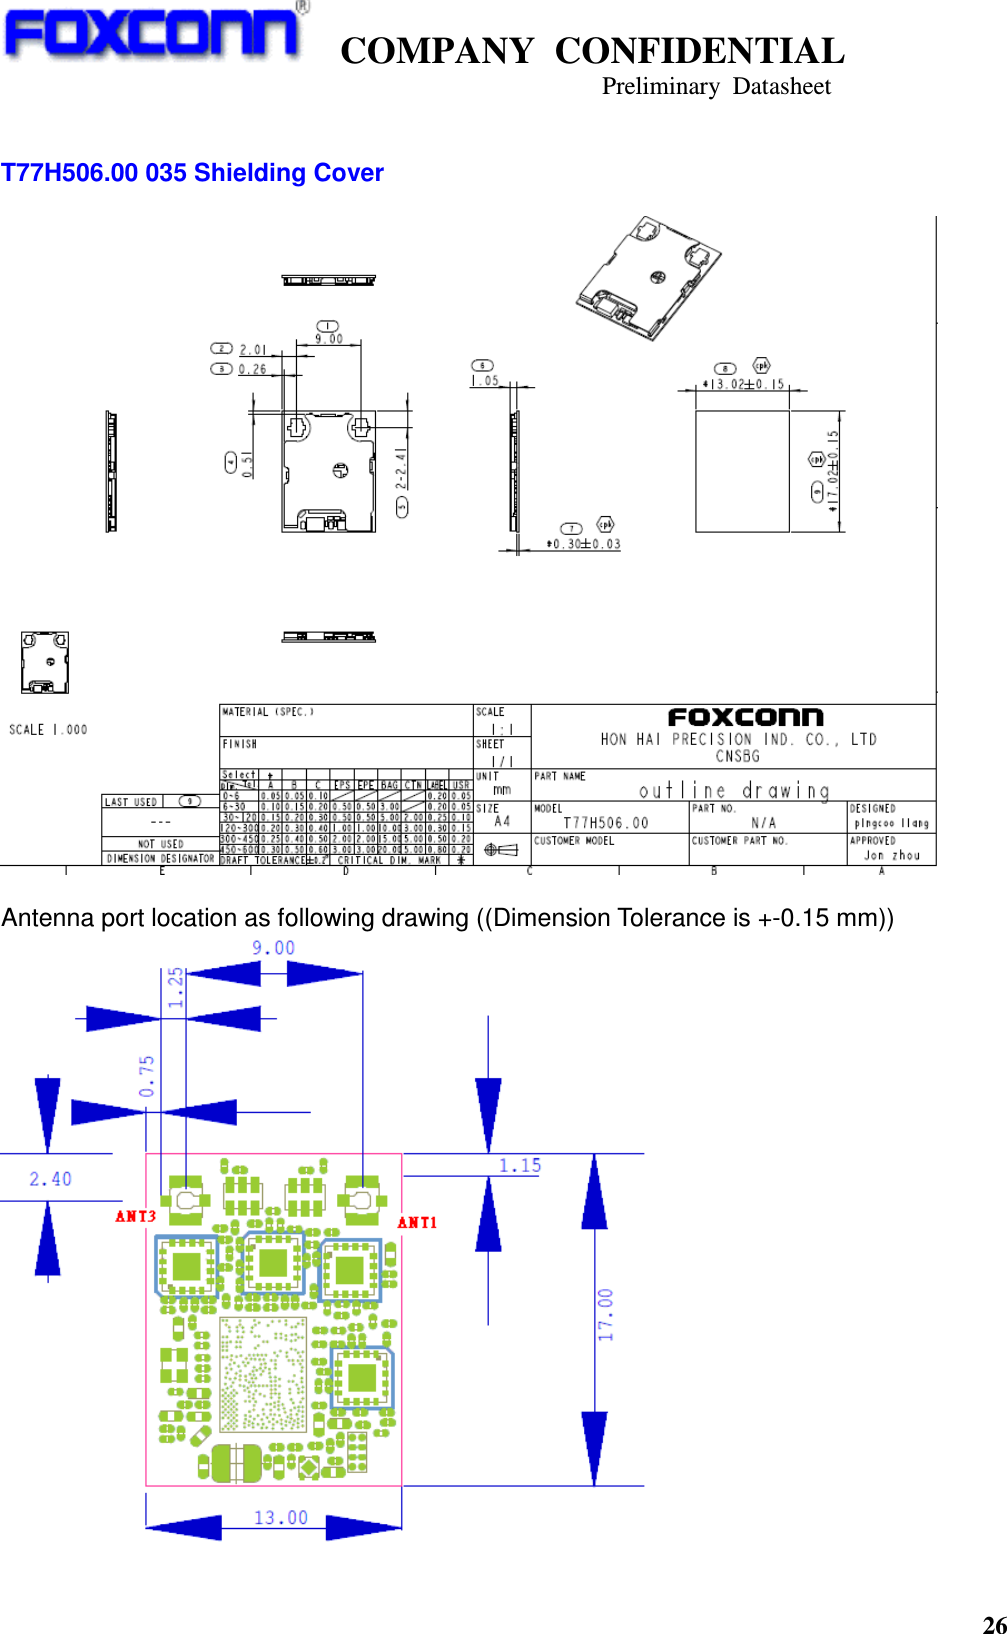    COMPANY  CONFIDENTIAL                                                                     Preliminary  Datasheet 26    T77H506.00 035 Shielding Cover    Antenna port location as following drawing ((Dimension Tolerance is +-0.15 mm))  